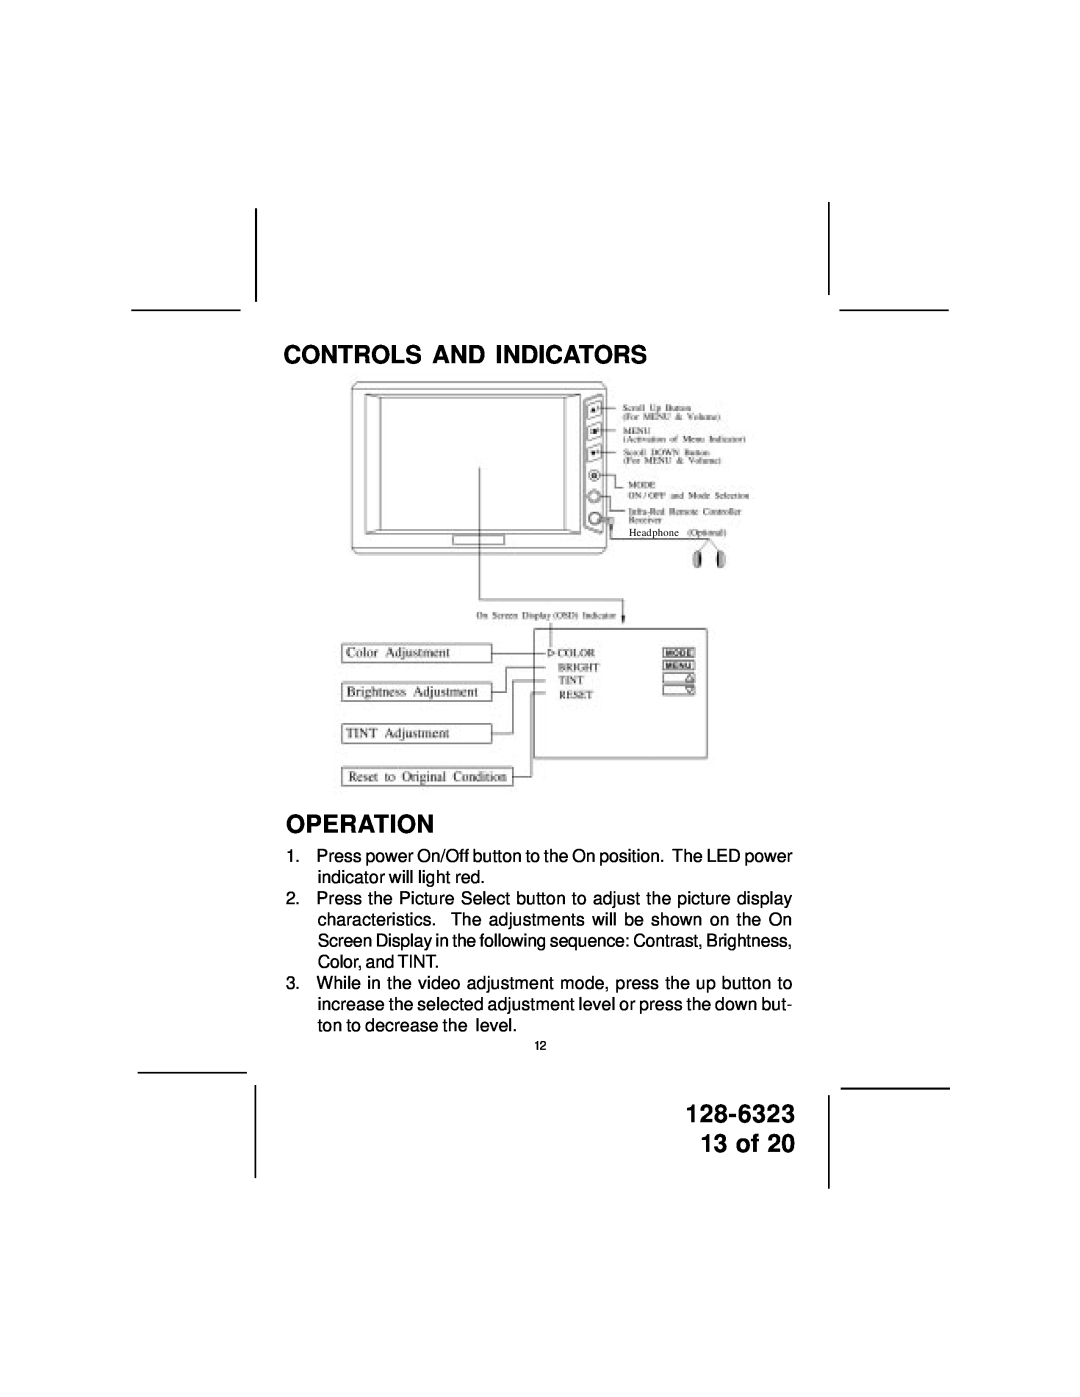 Audiovox LCM5043NP, LCM5643NP owner manual Controls And Indicators, Operation, 128-6323 13 of 